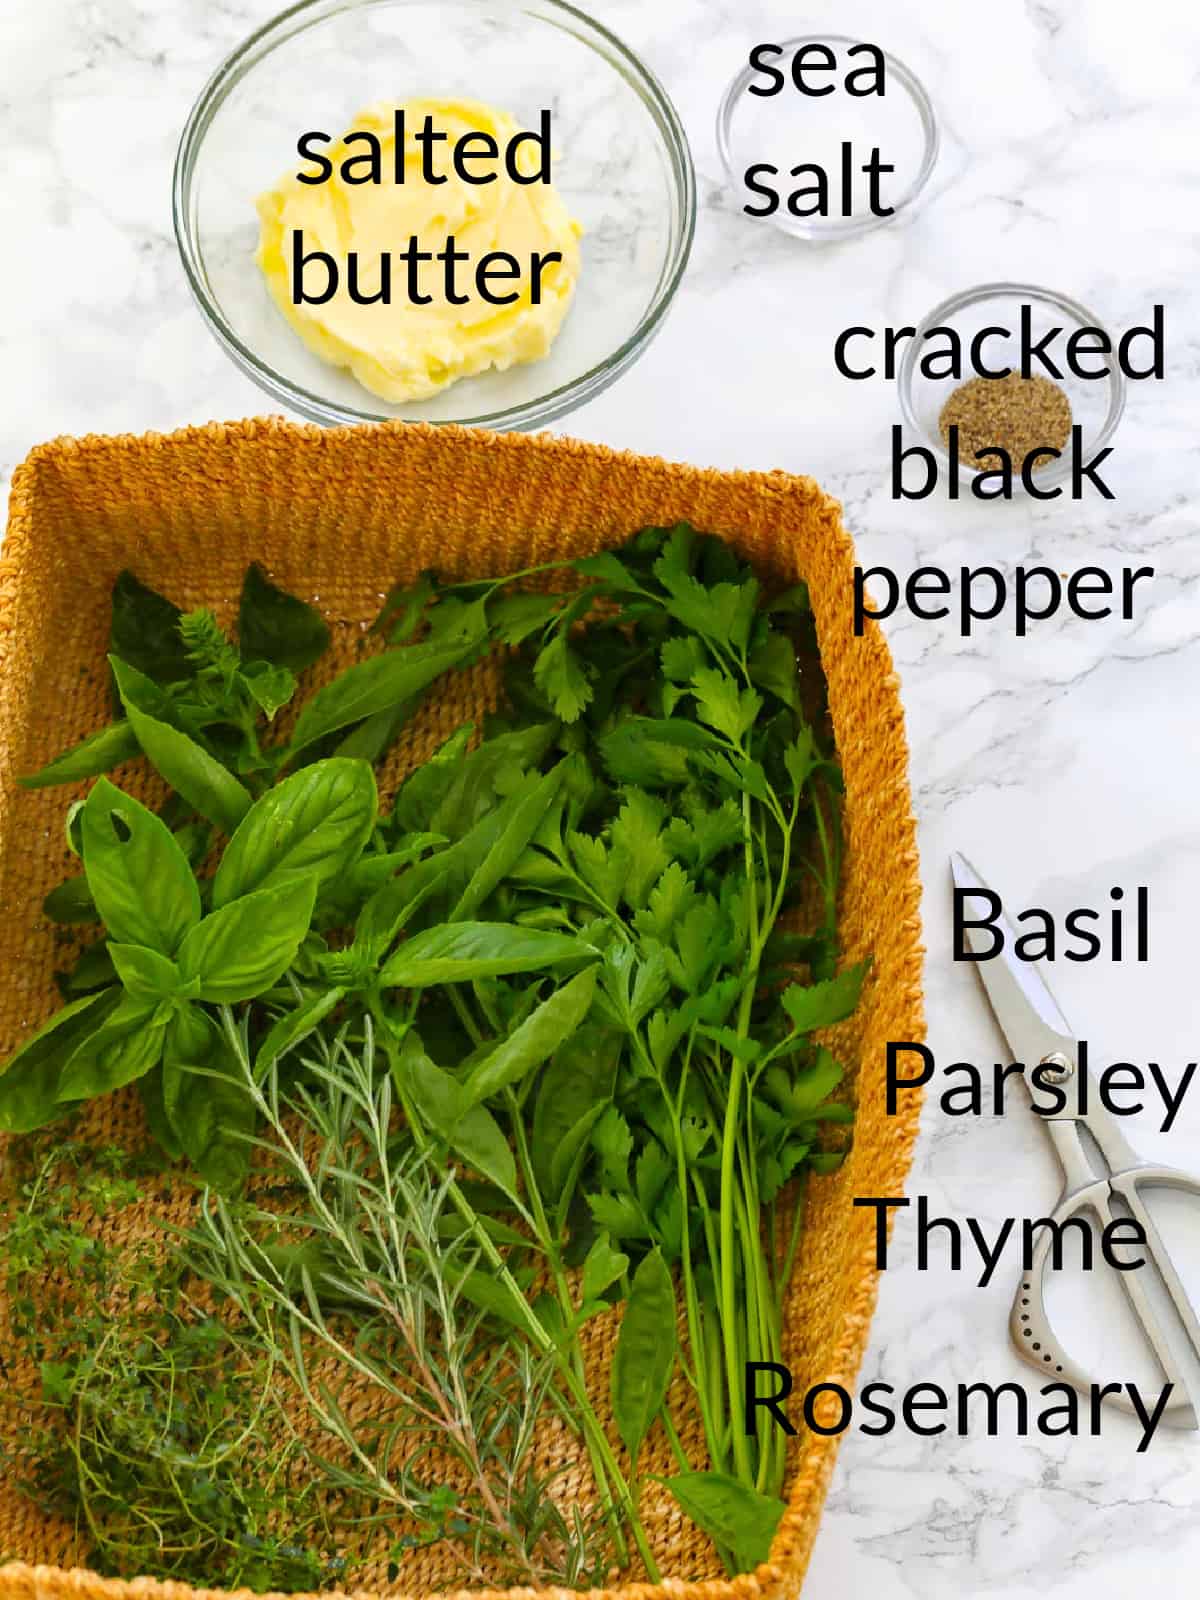 All the ingredients labeled to make herb butter including fresh herbs, butter, salt and pepper.